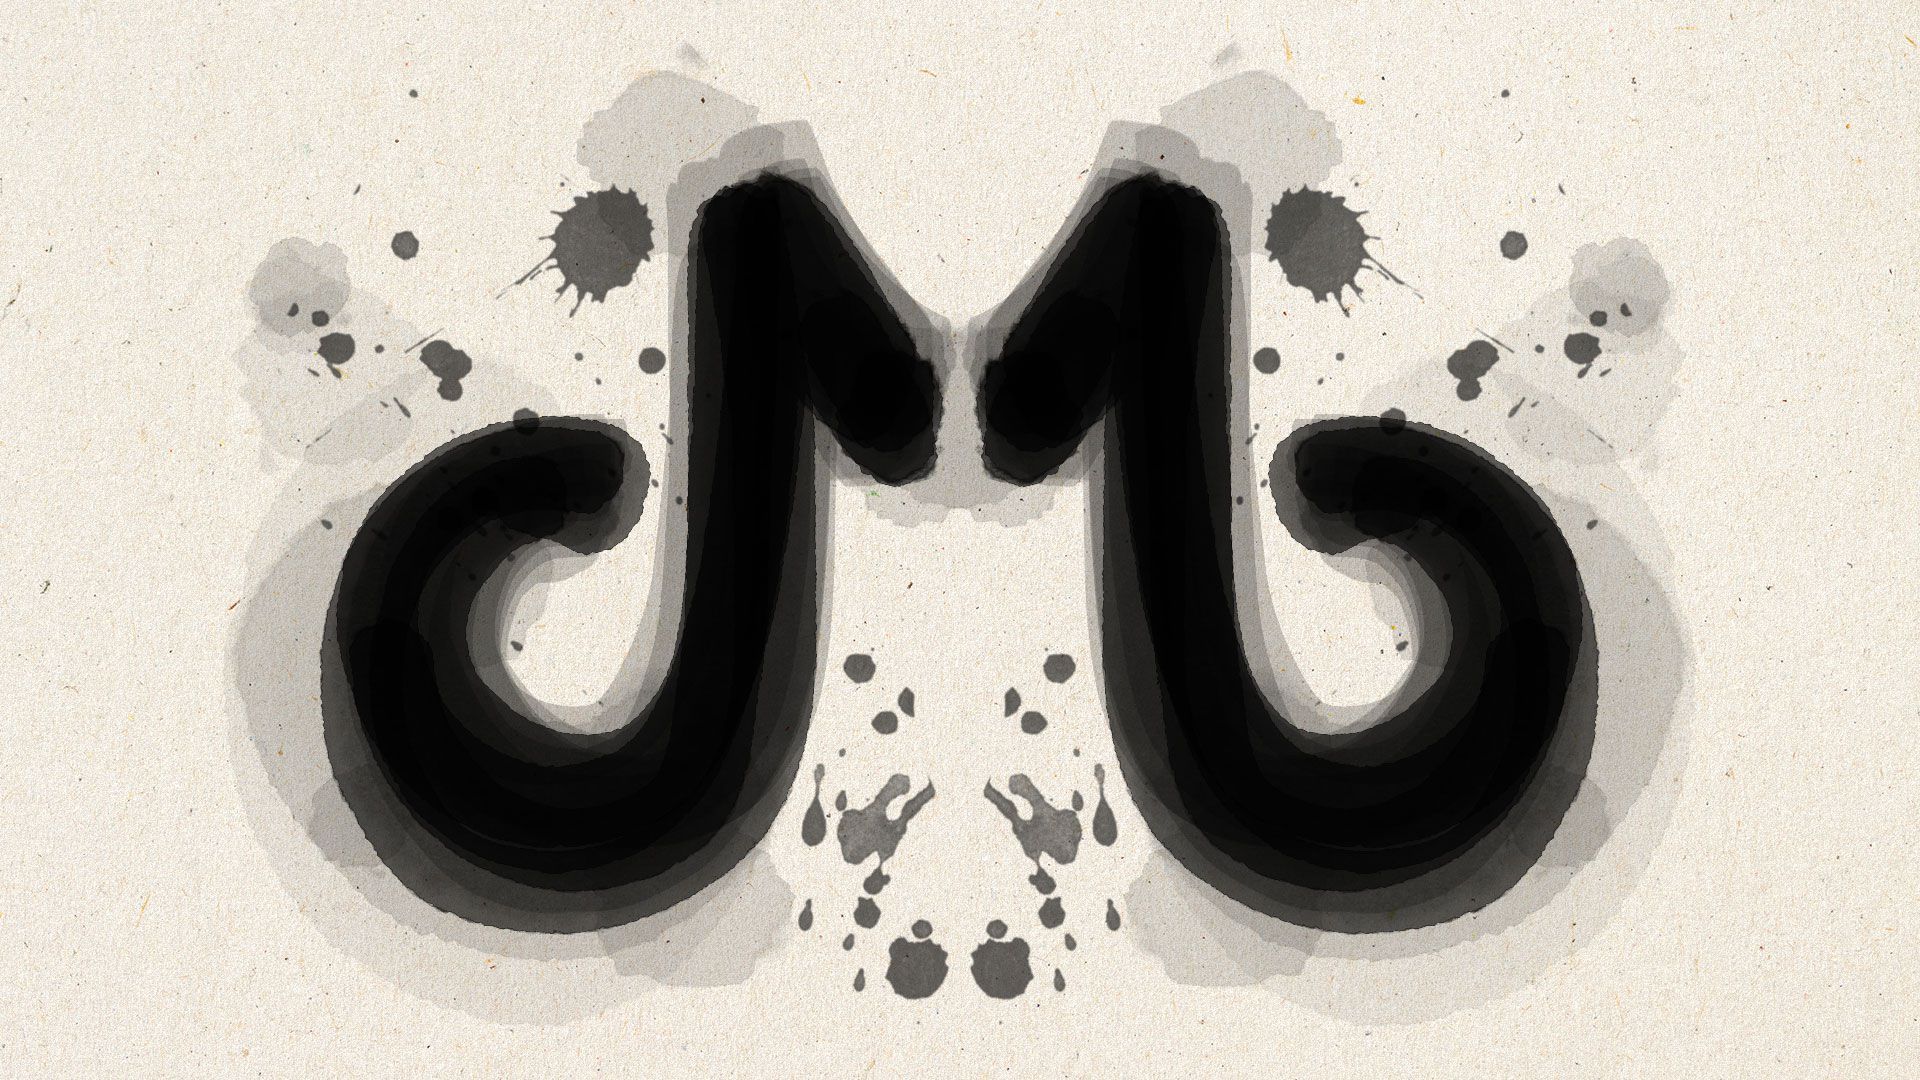 Illustration of a Rorschach test made out of the TikTok logo. 